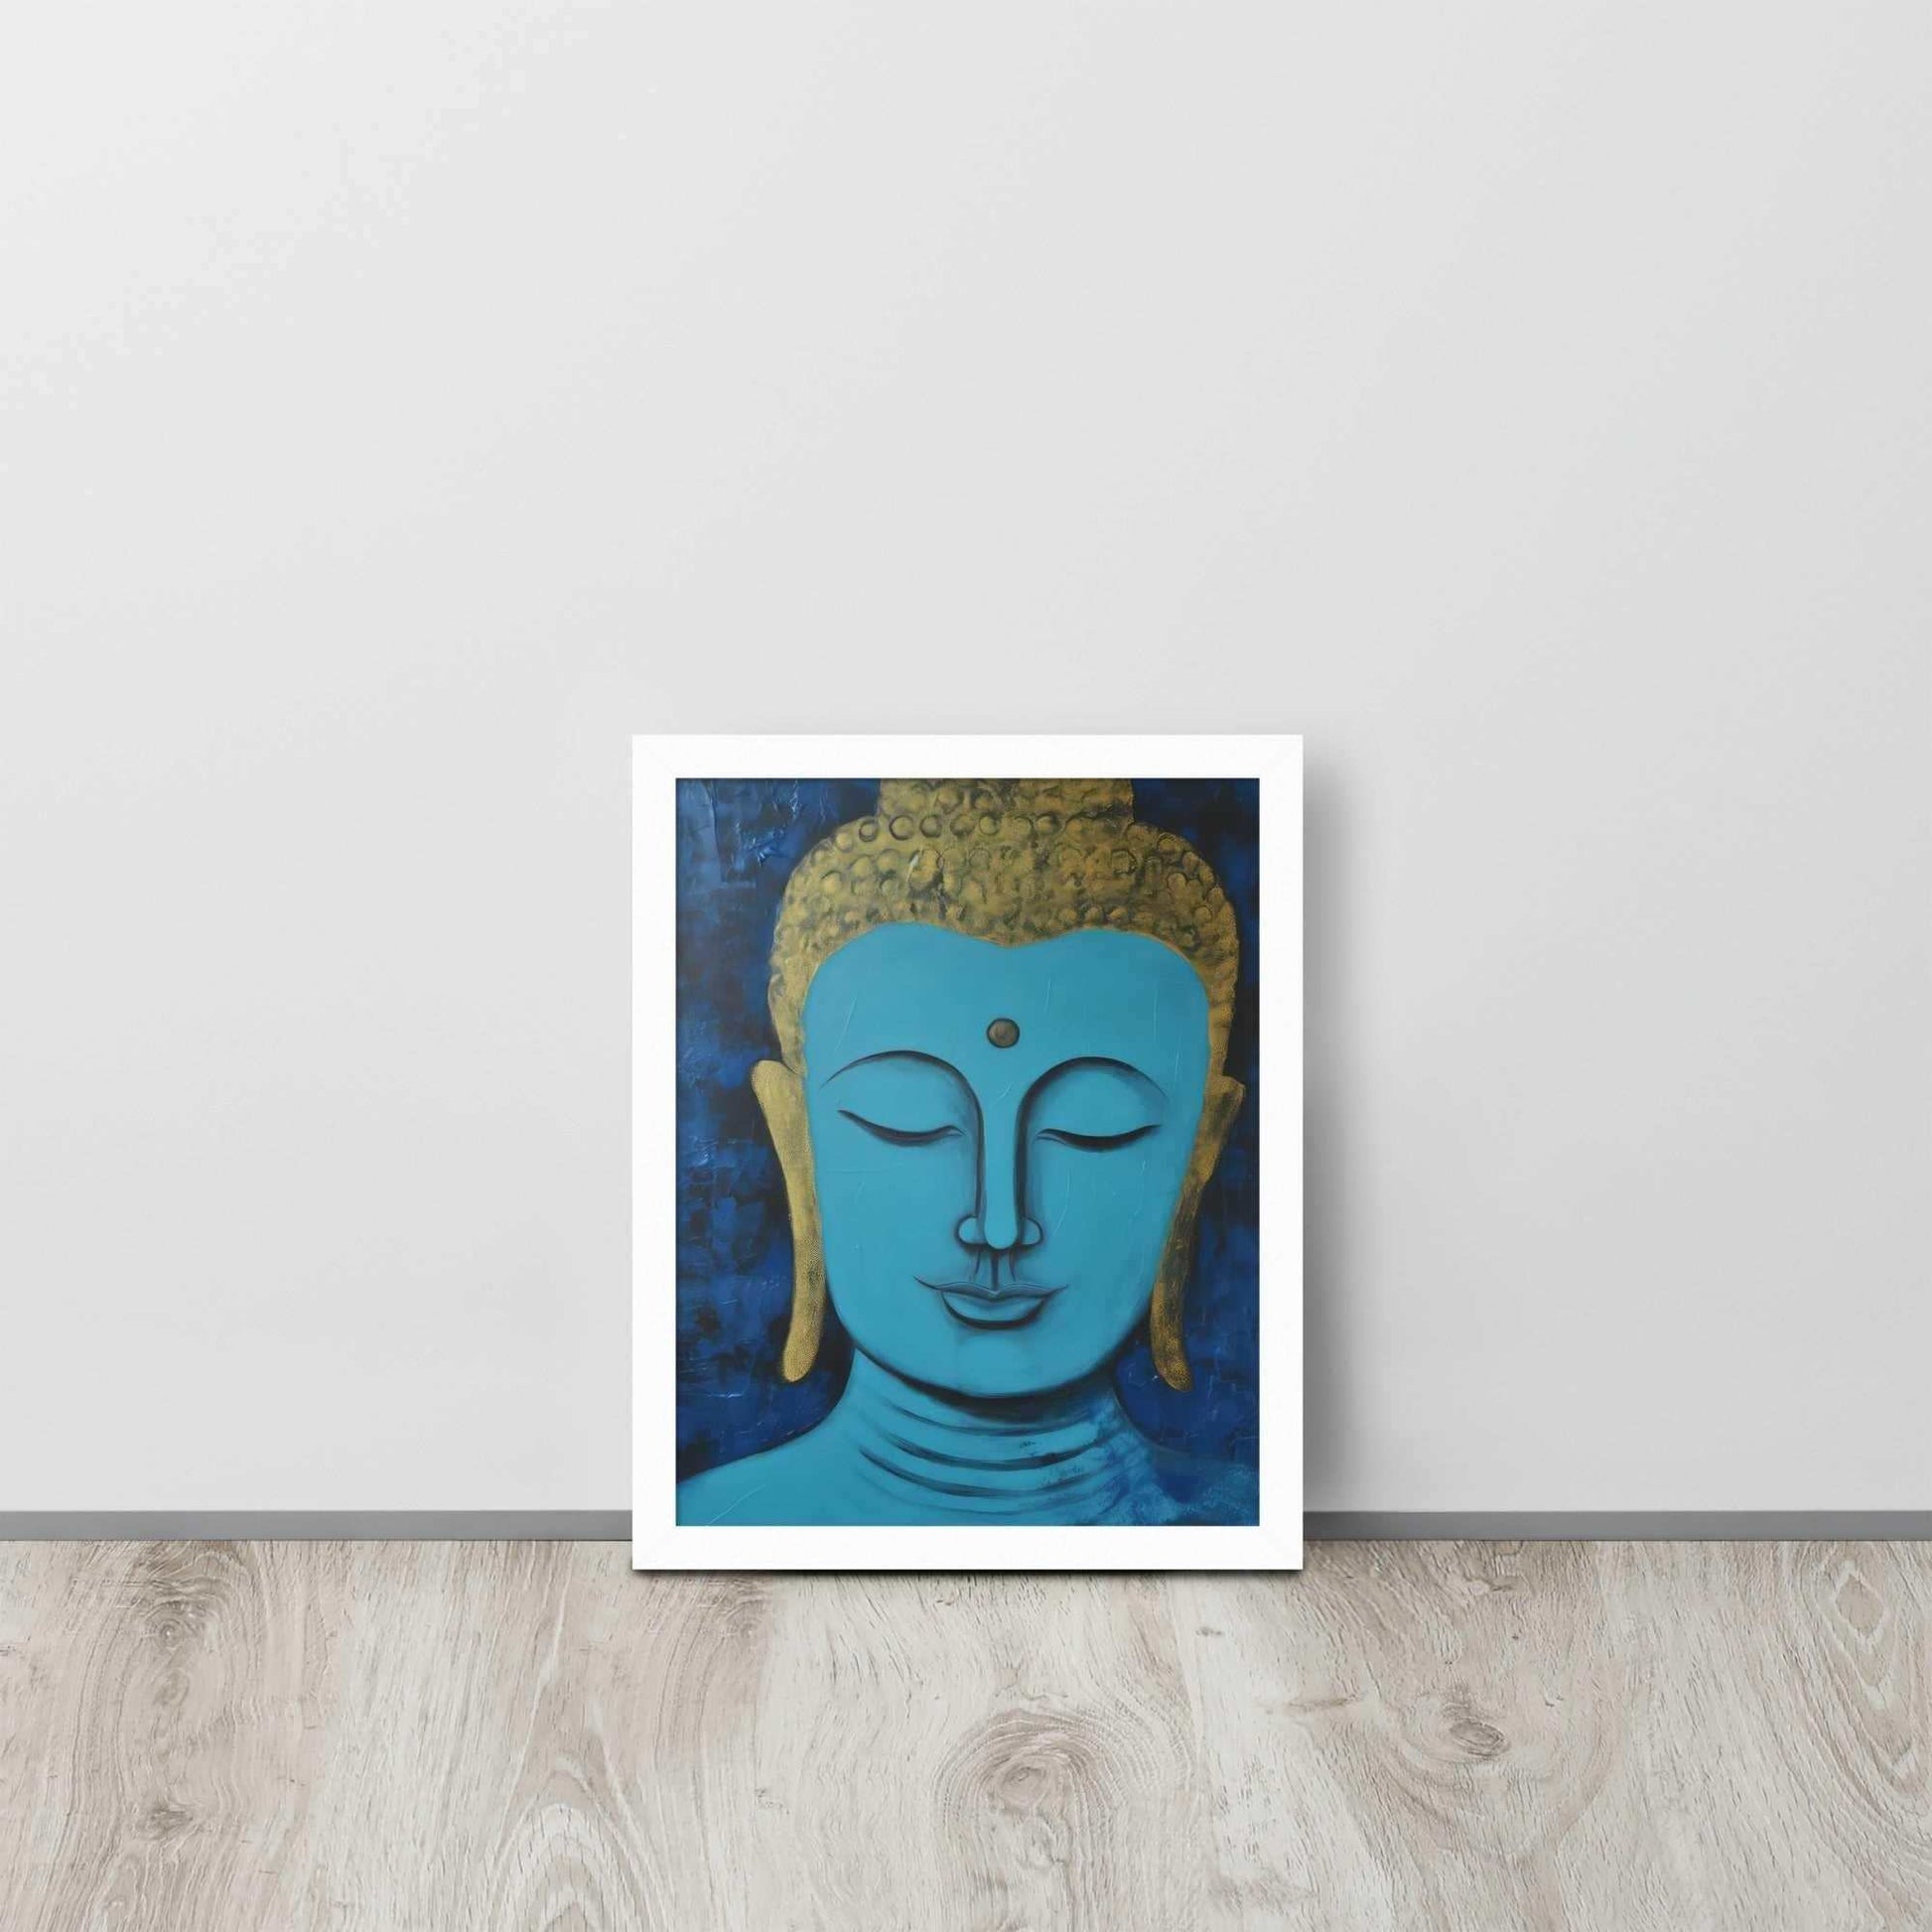 A framed poster with a white oak finish features a serene Blue Buddha Zen Wall Art with golden touches, set against a darker blue backdrop with a rich, textural finish, positioned on a light wooden floor by a plain white wall.